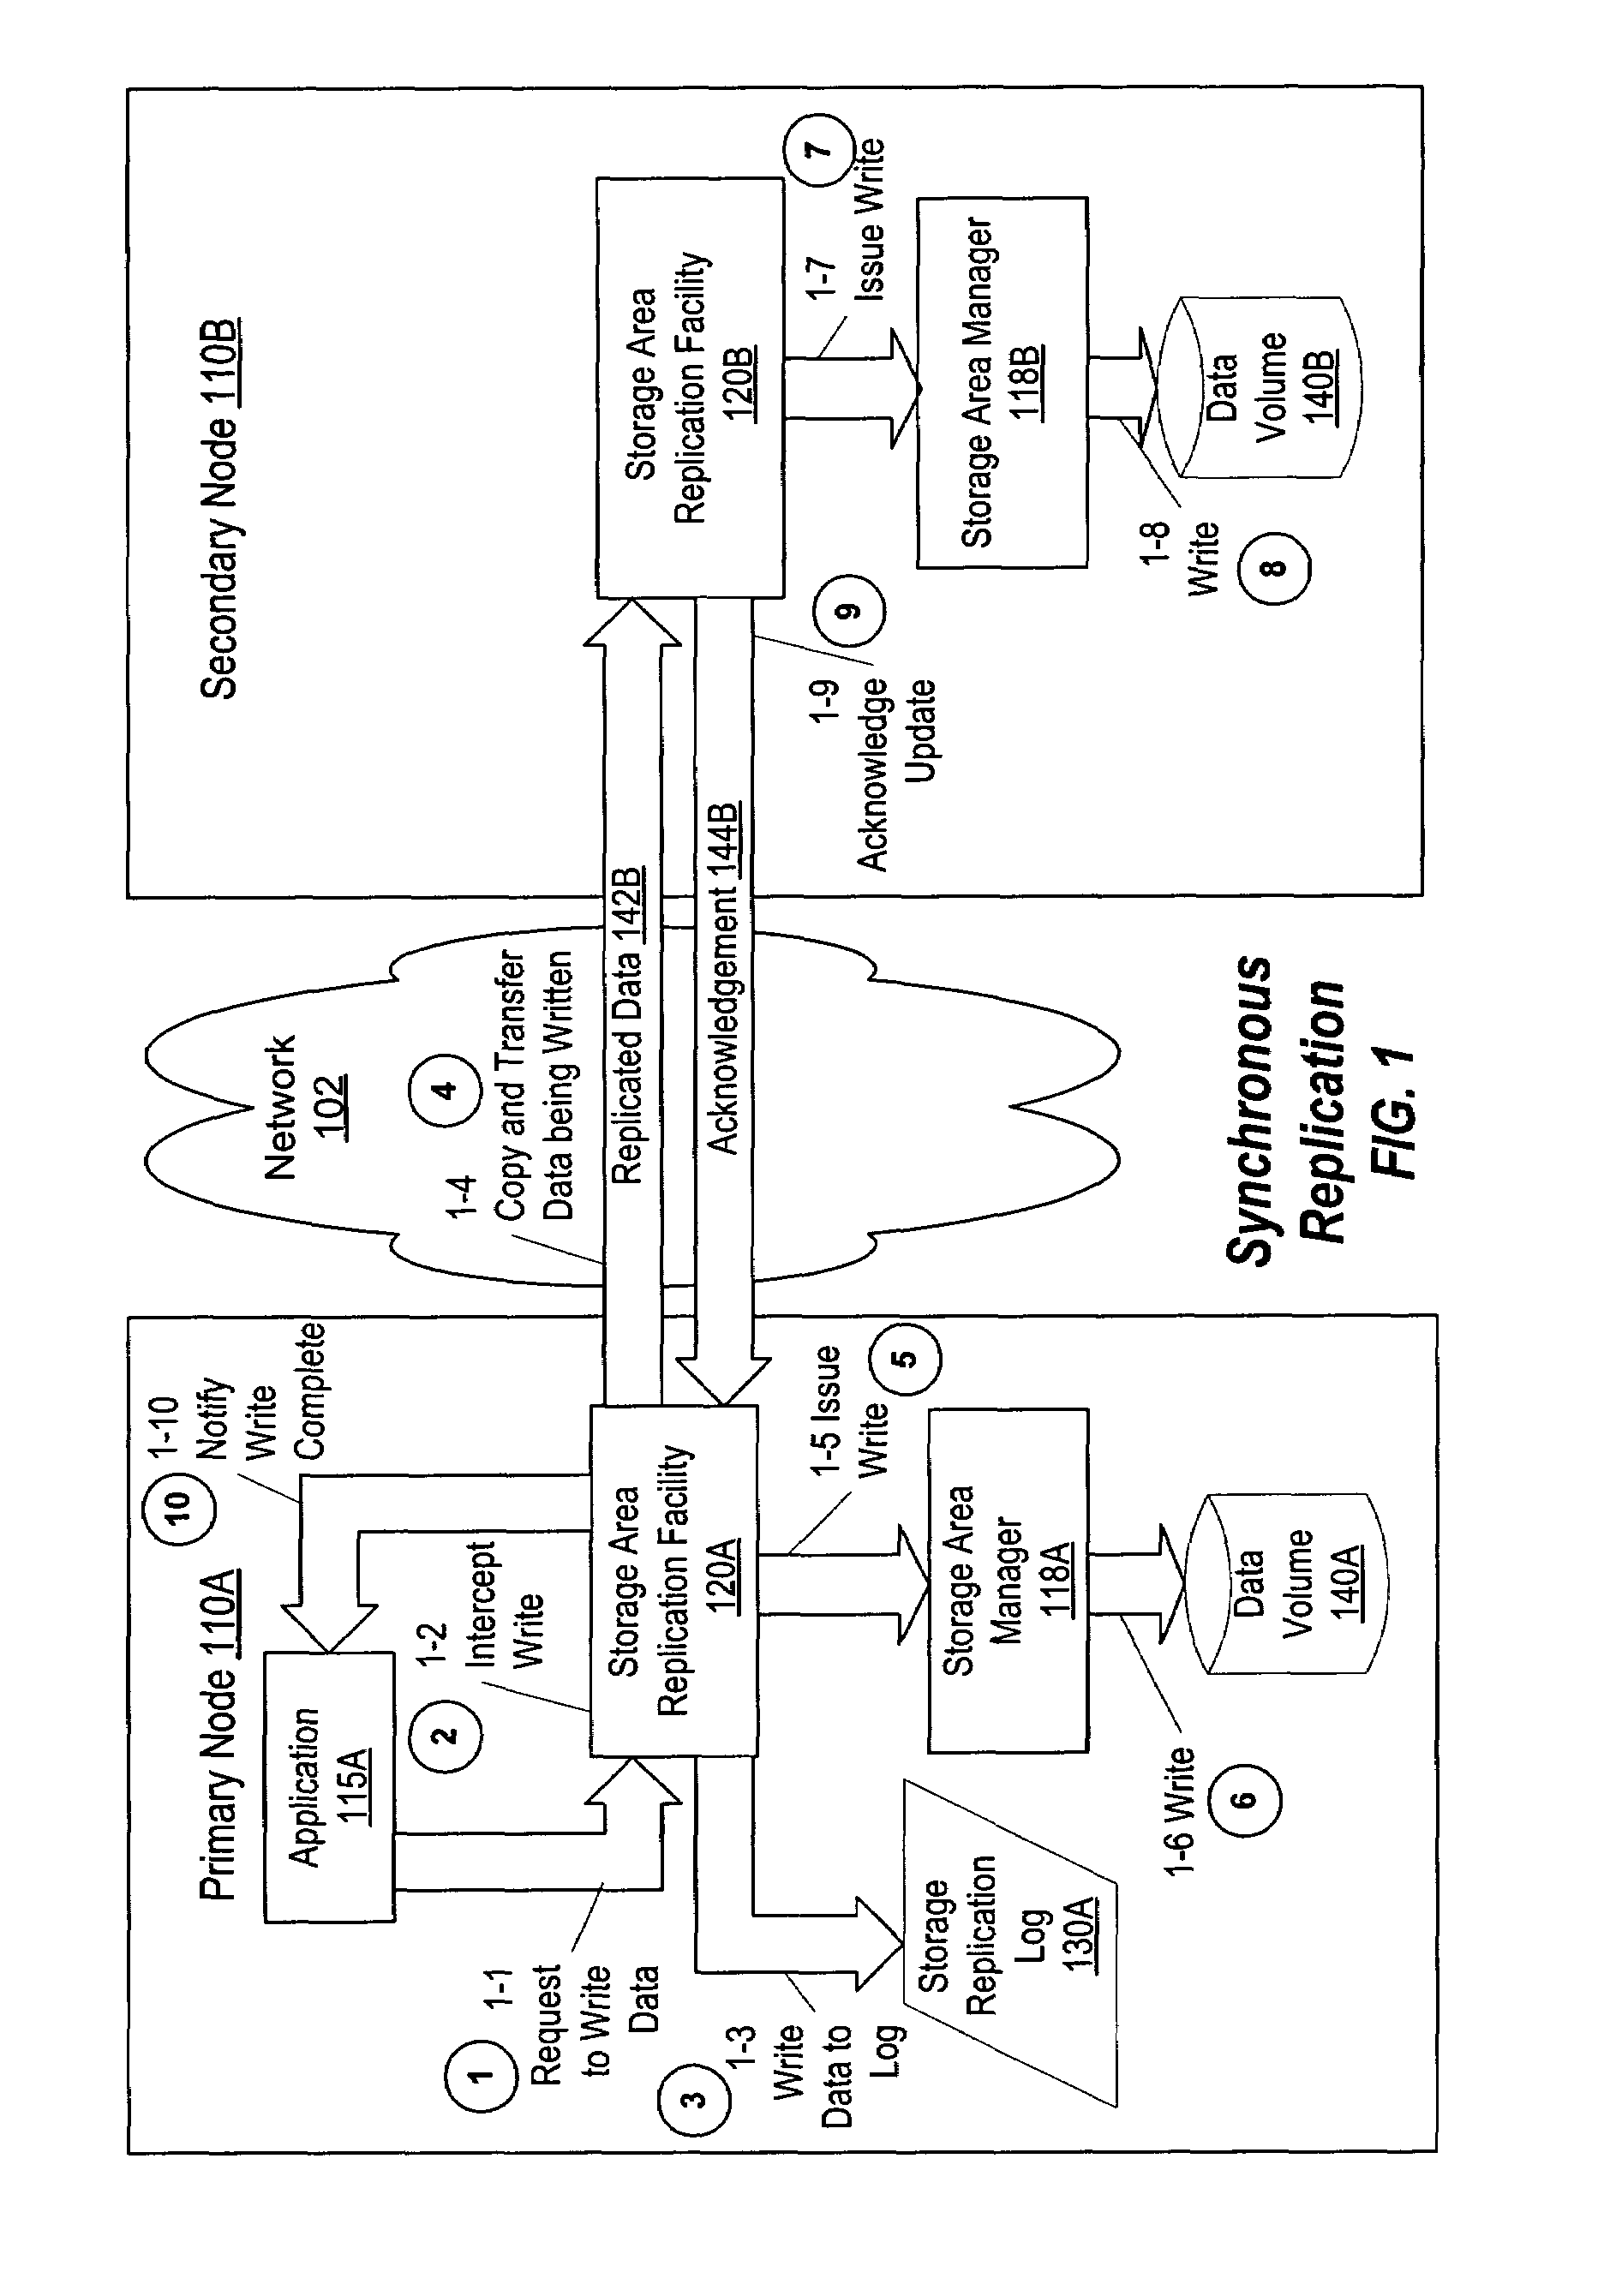 Method and system for performing periodic replication using a log